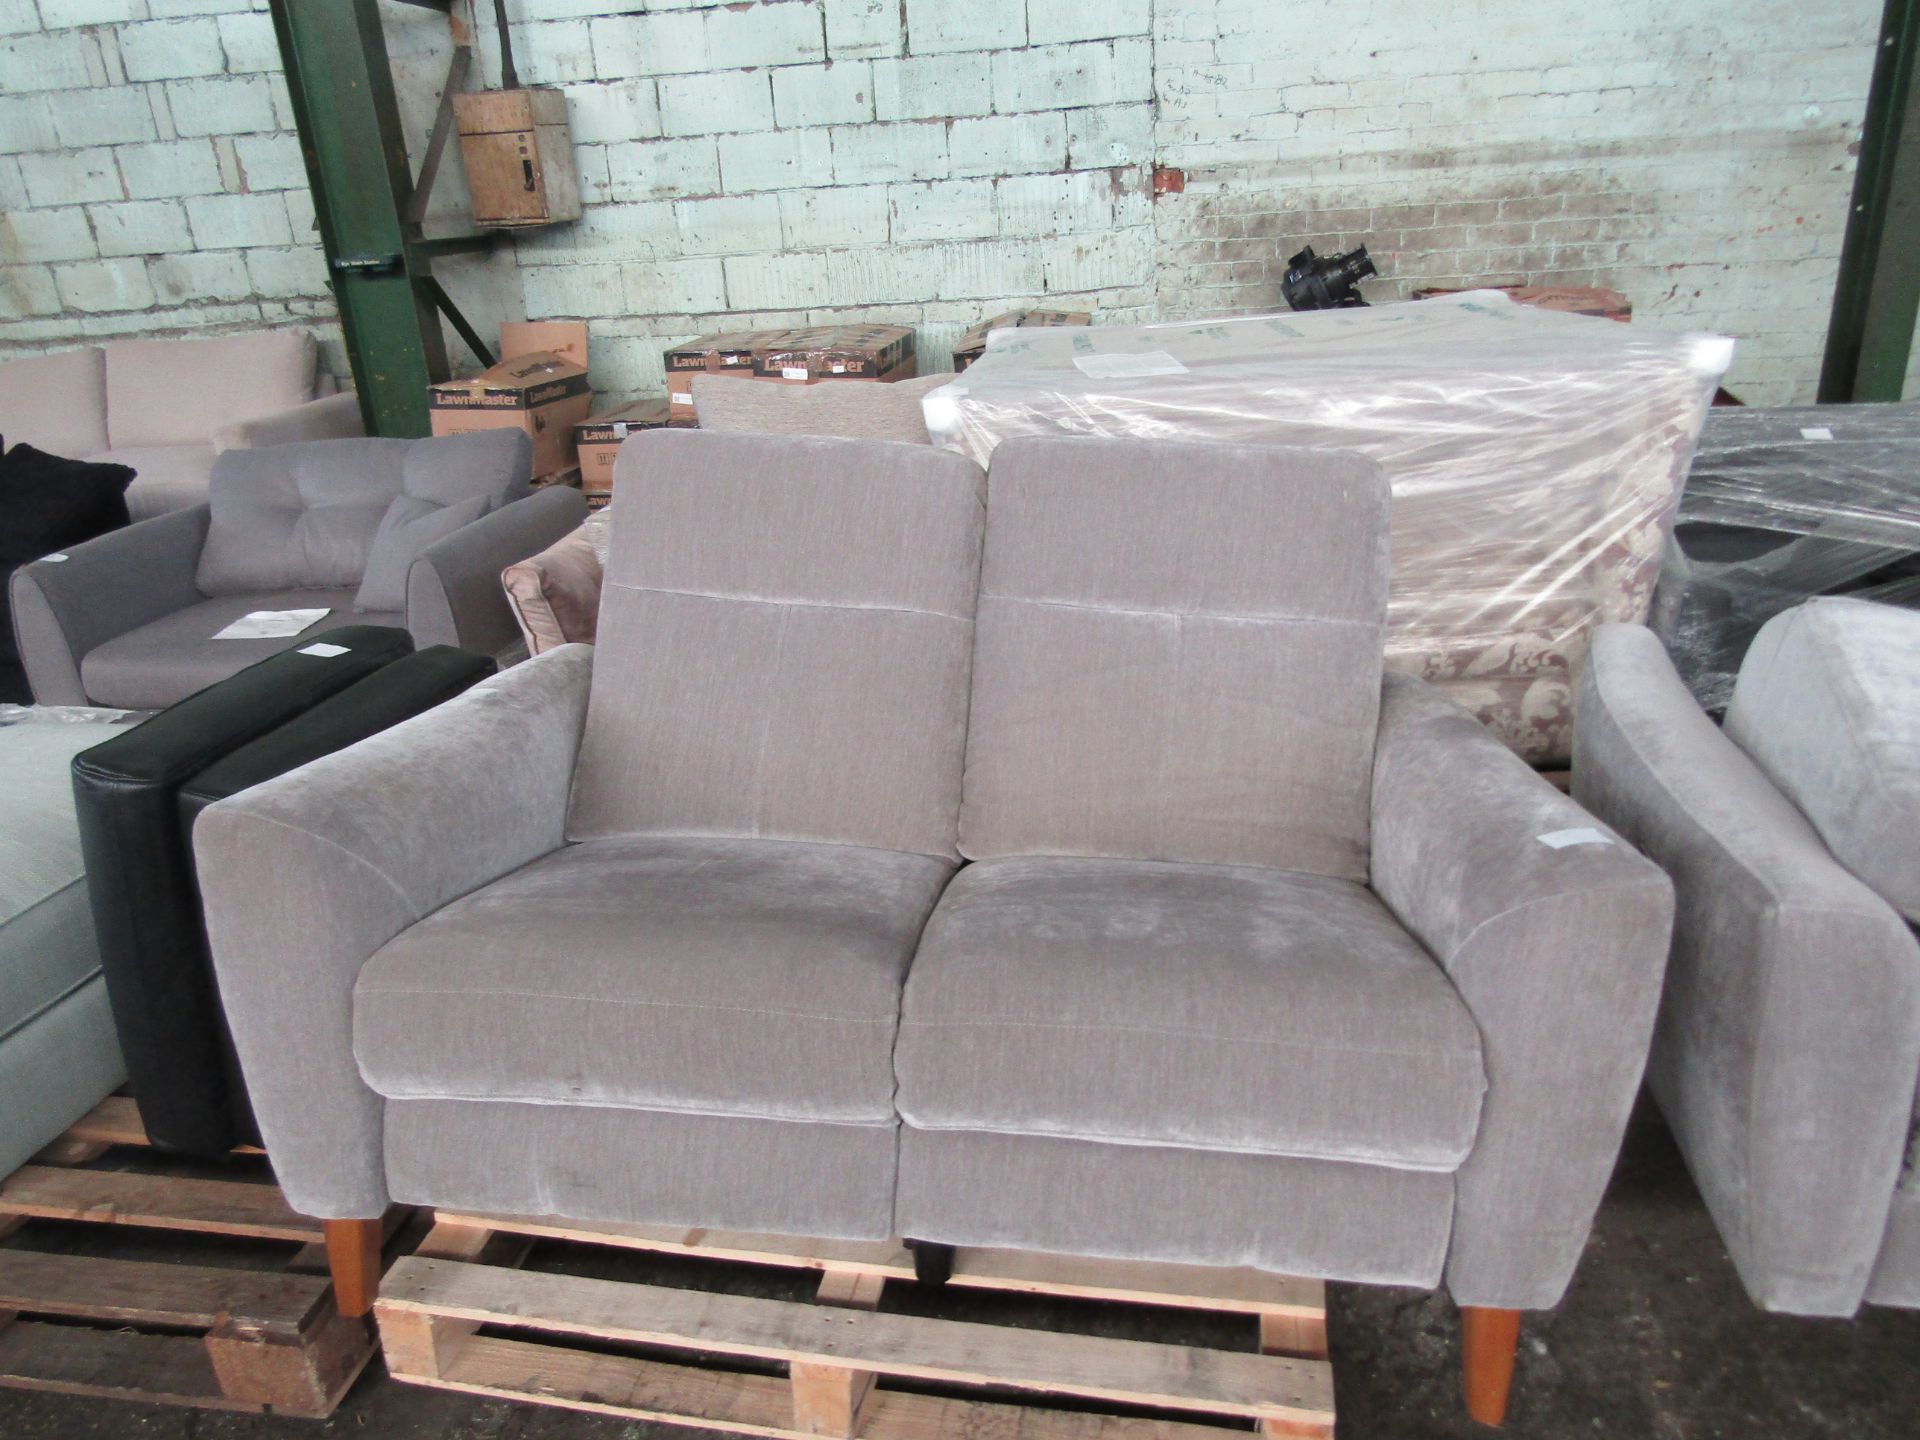 Oak Furnitureland Dylan 2 Seater Electric Recliner Sofa in Oxford Grey Fabric RRP 999.99 Our Dylan - Image 2 of 2